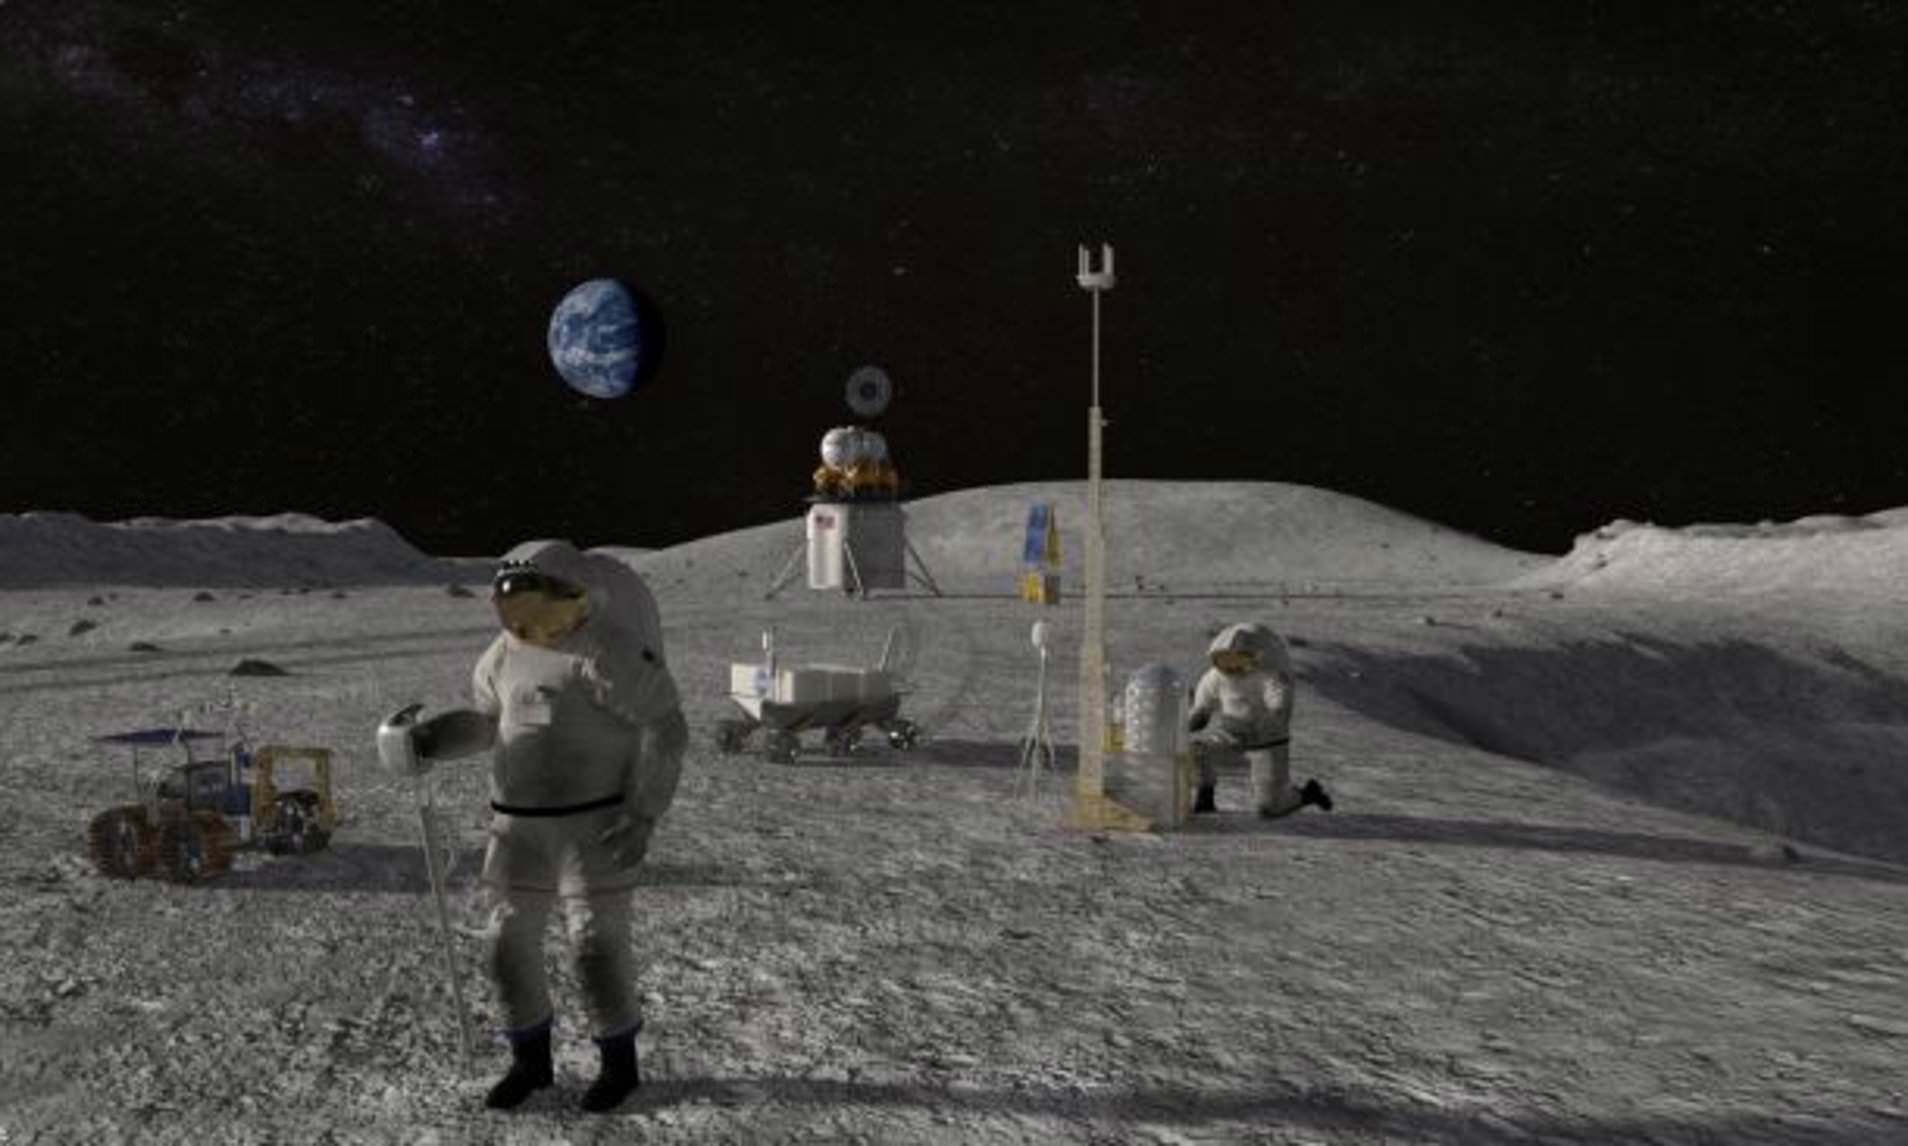 NASA to take first nonAmerican astronaut to the moon